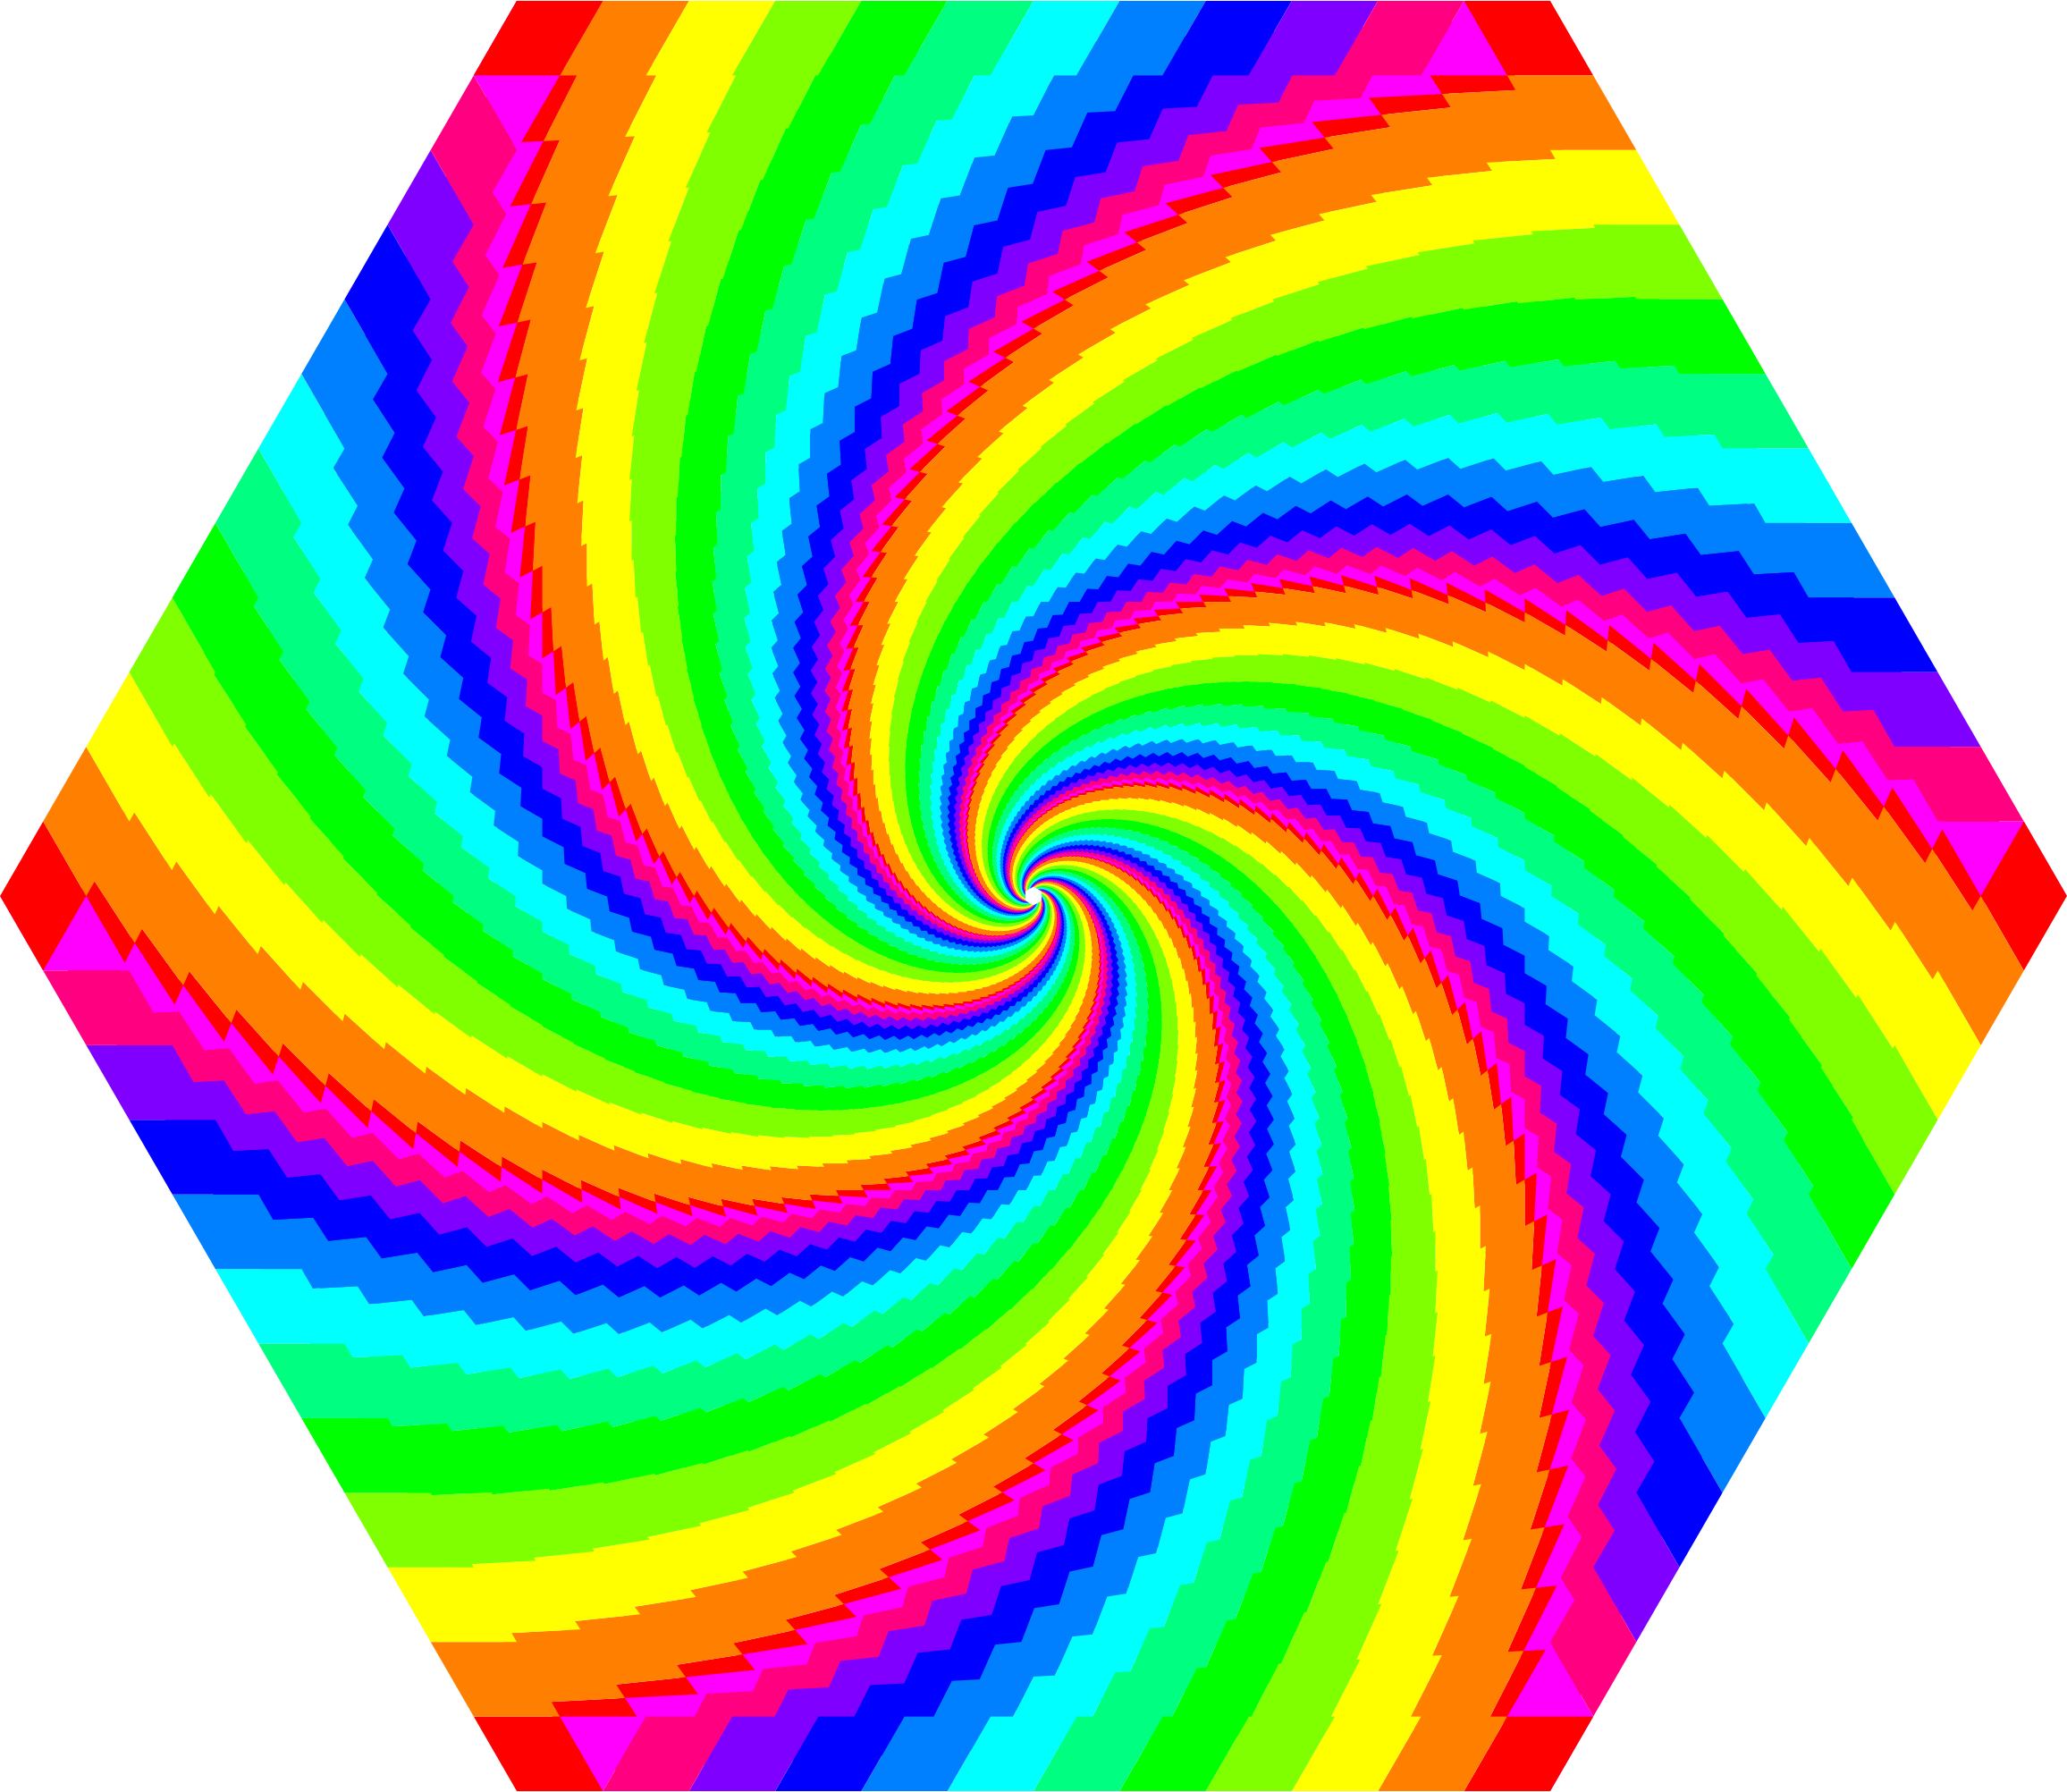 Cyclone - Portable Network Graphics (2312x2004)